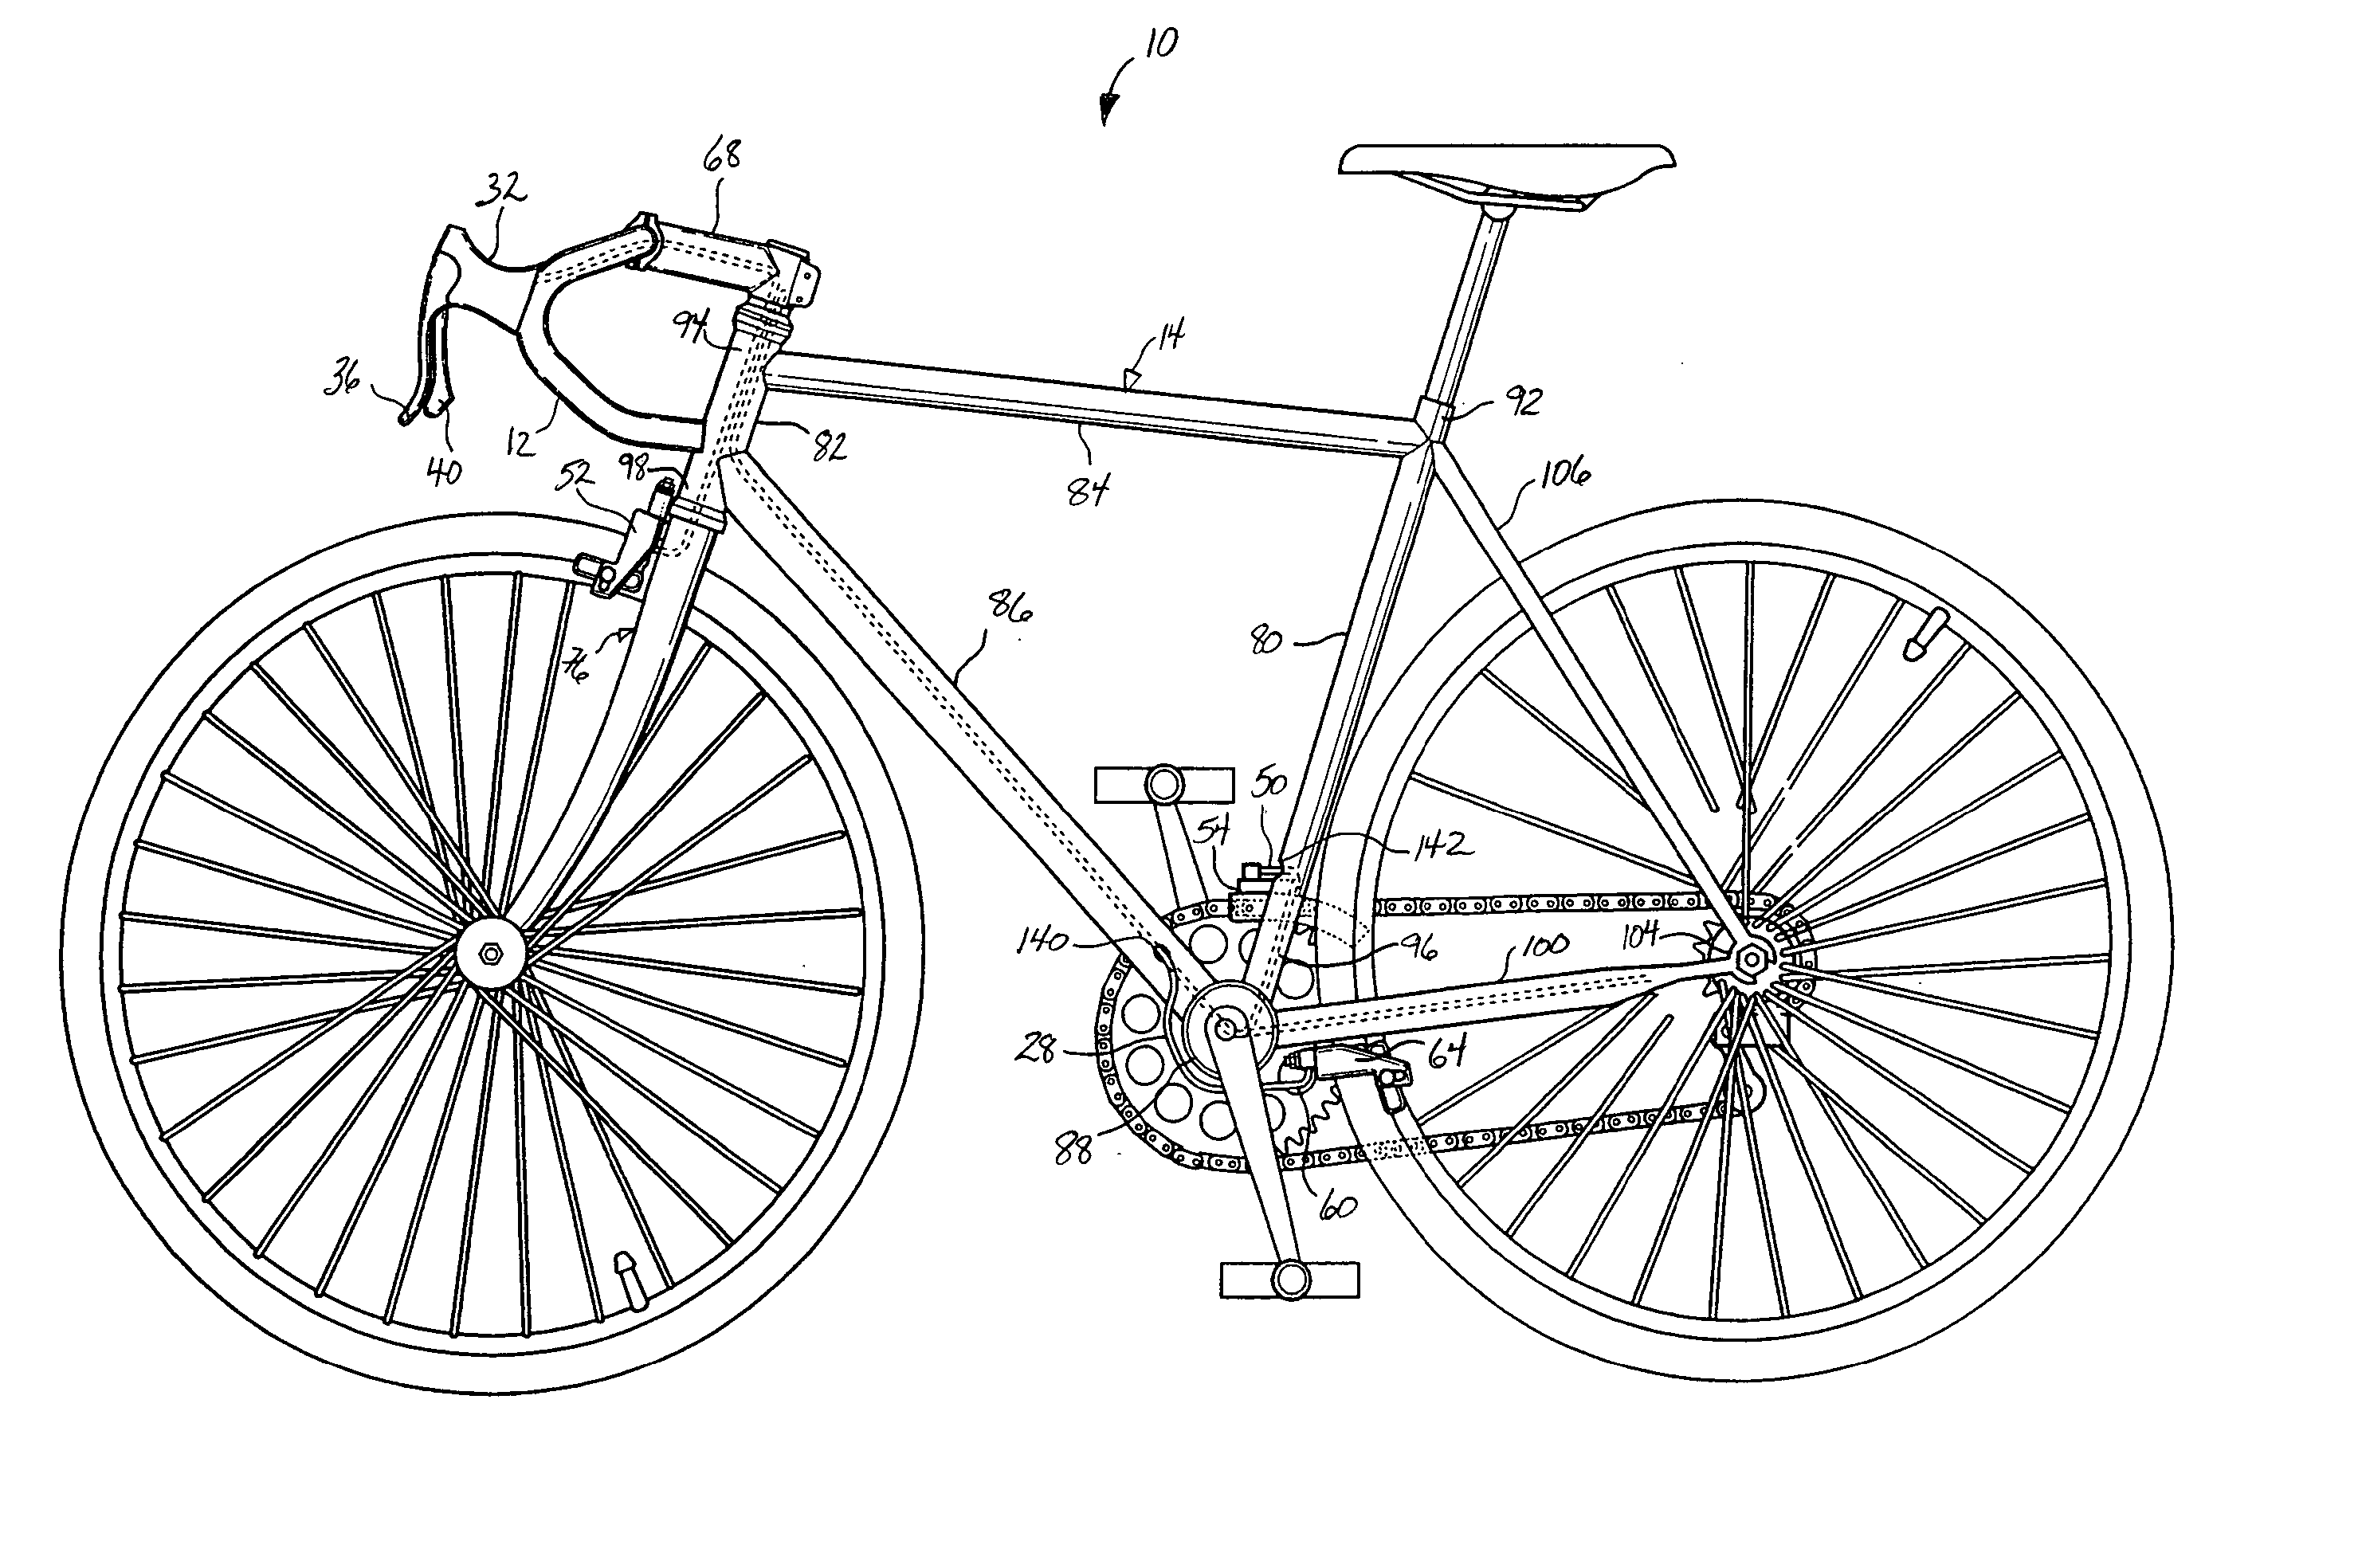 Method to conceal bicycle control cables within the handlebars, stem and frame